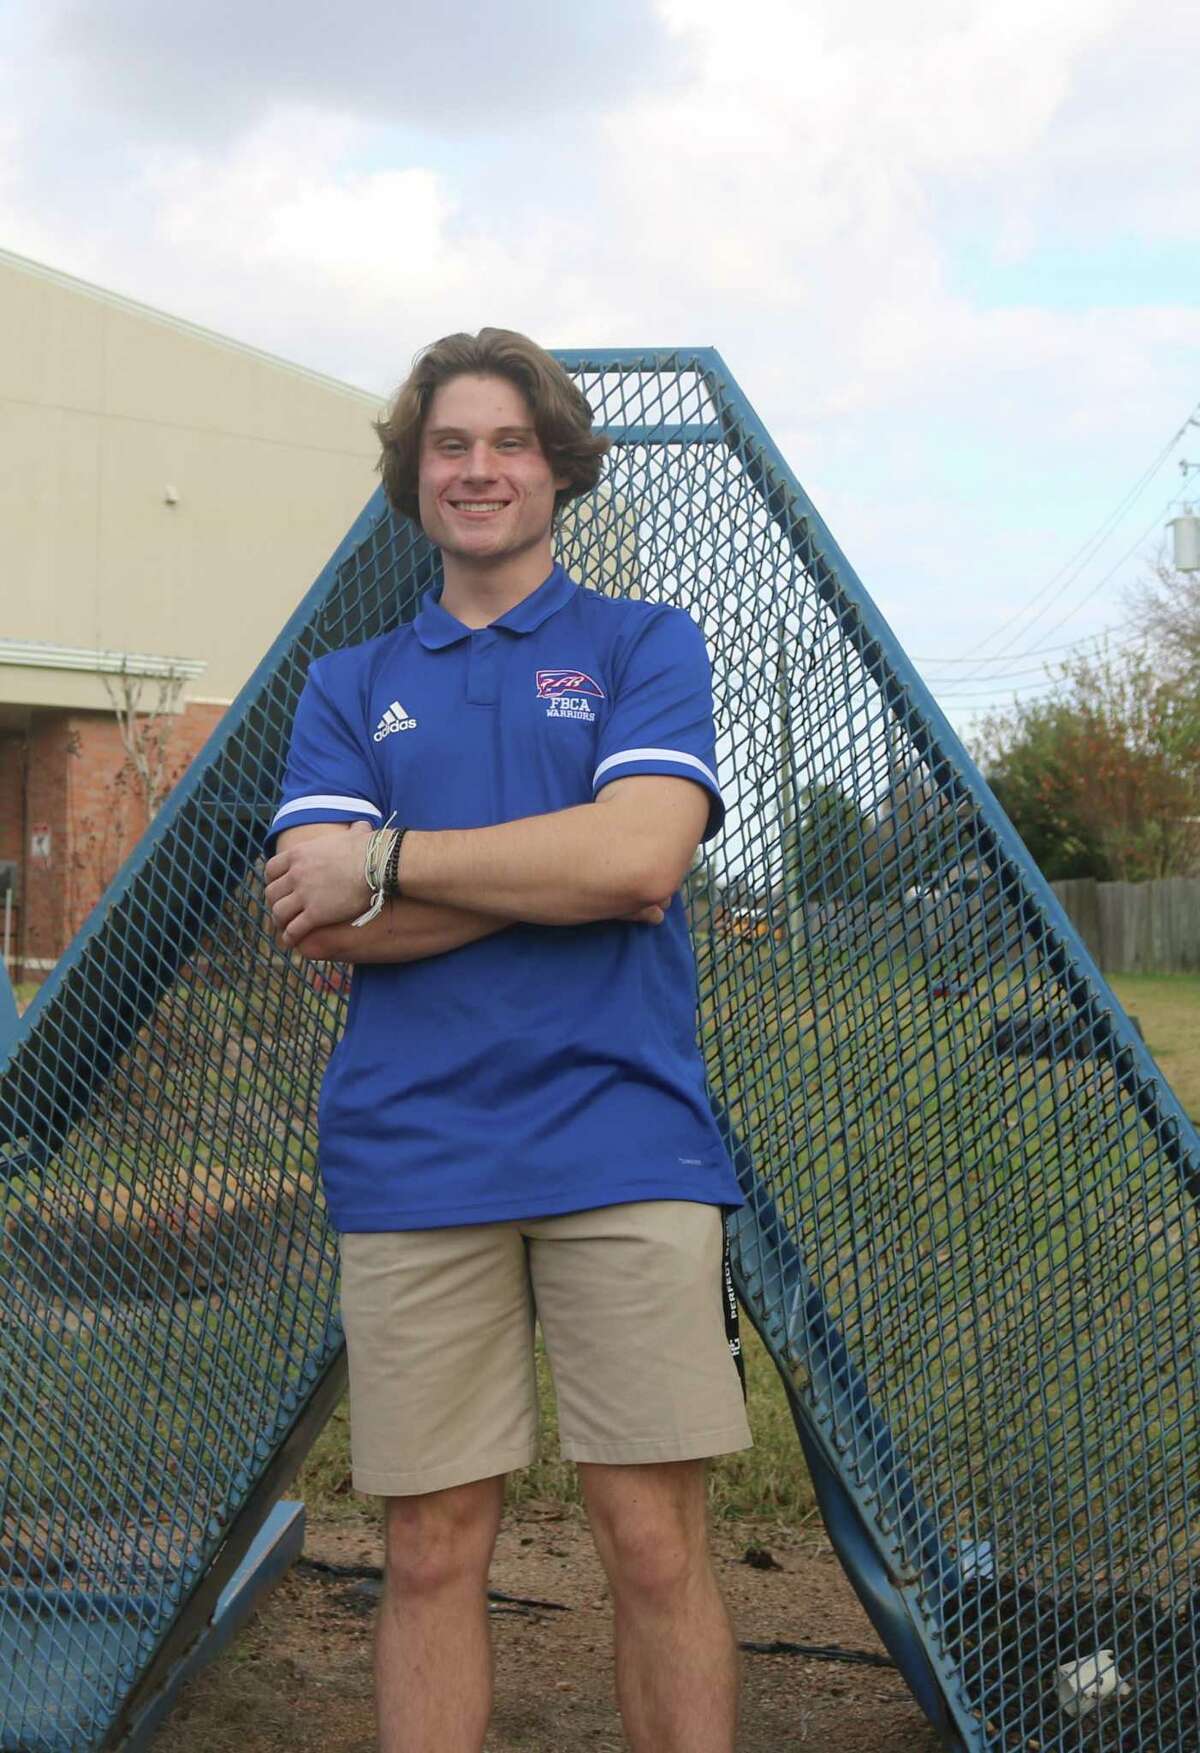 FBCA's Brooks Harrison may have unknowingly ended his high school career way back on March 13 when he hit .523 at the Franklin Tournament. He's working out, hoping for a resumption to the season, but if not, he's working out in preparation for a college ride.